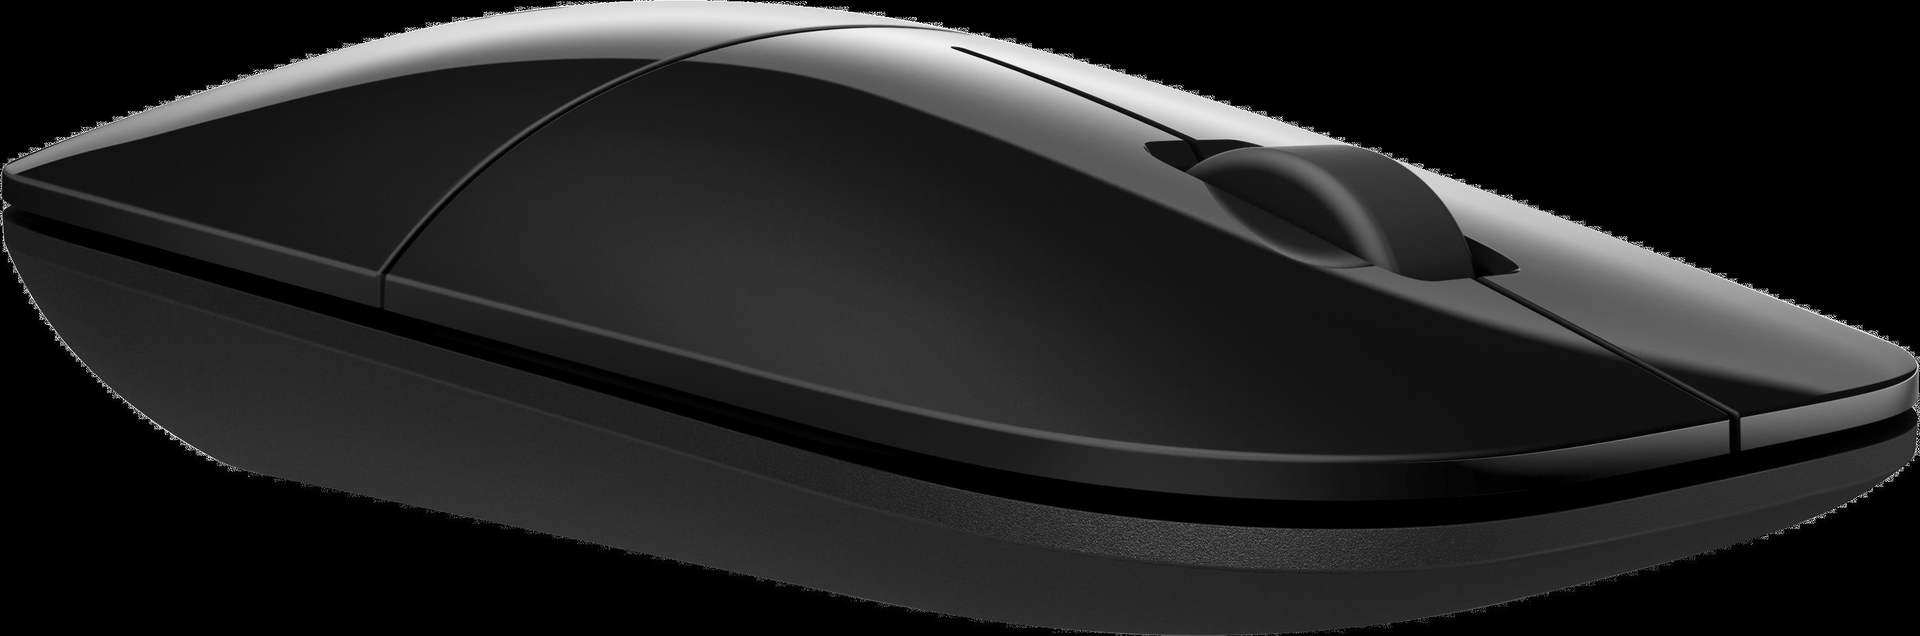 HP Inc. WIRELESS MOUSE BLACK ENGLISH EUROPE- Z3700 LOCALIZATION V0L79AA#ABB IN